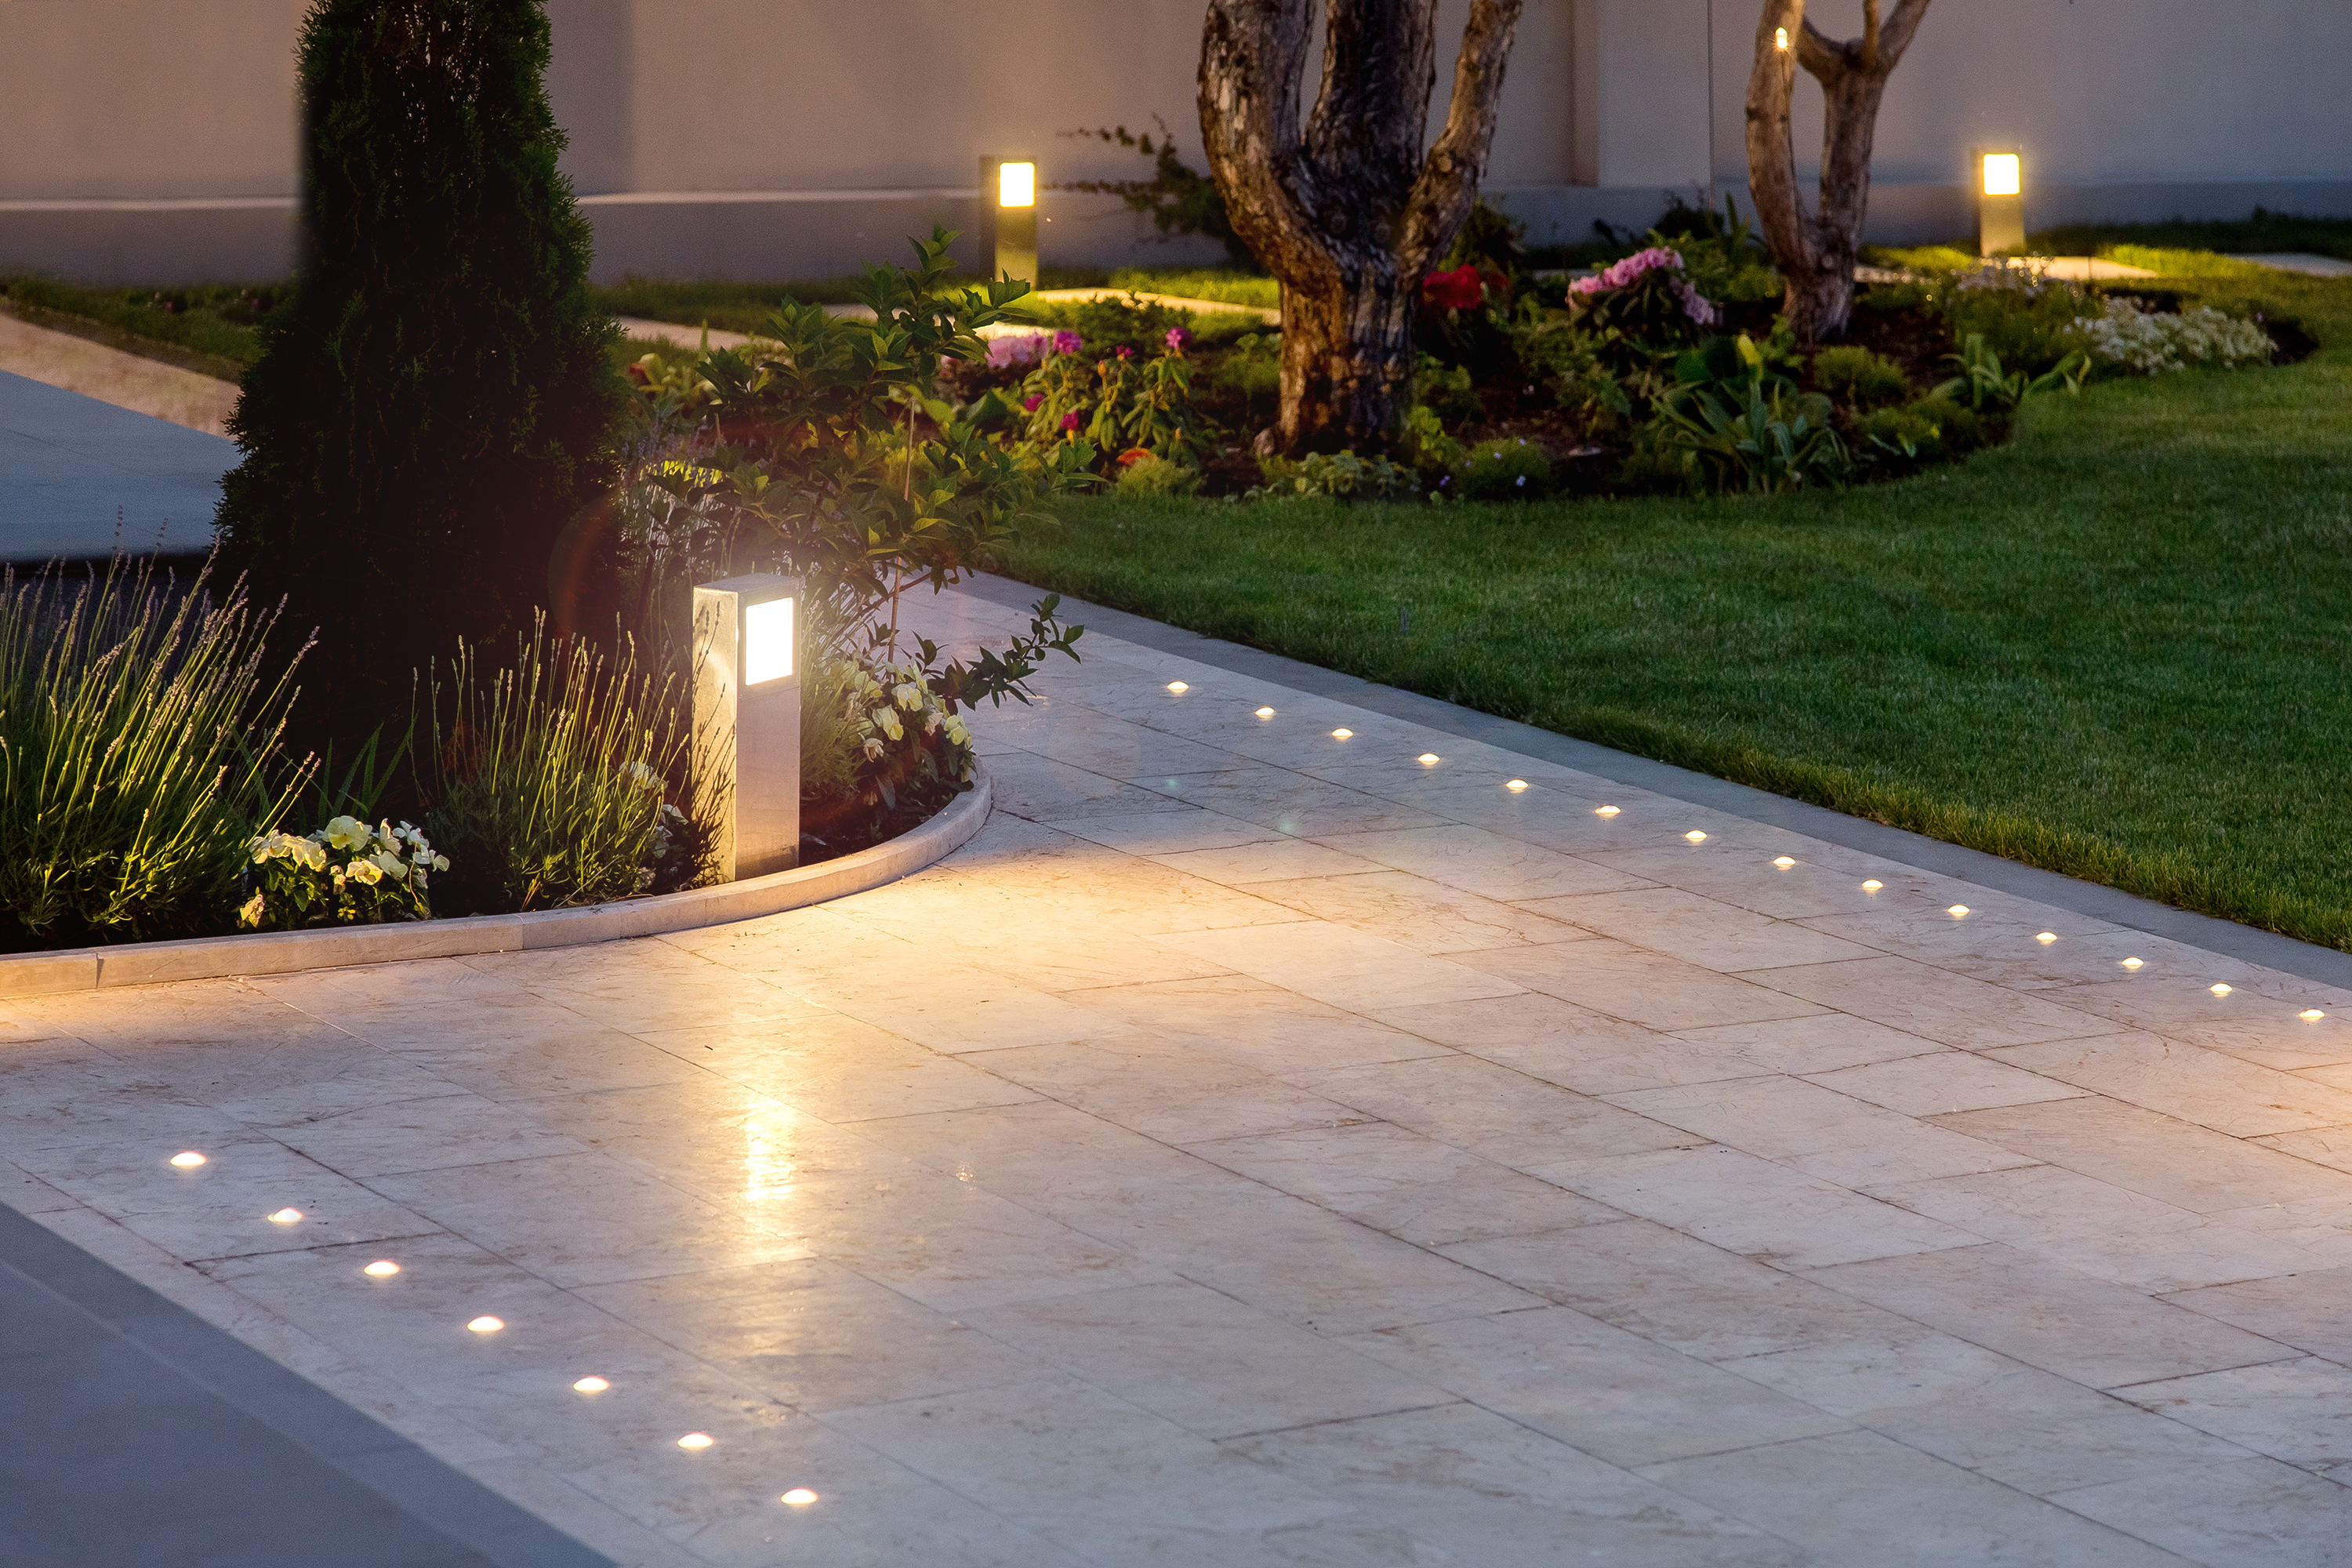 How To Install Low Voltage Outdoor Landscape Lighting • The Garden